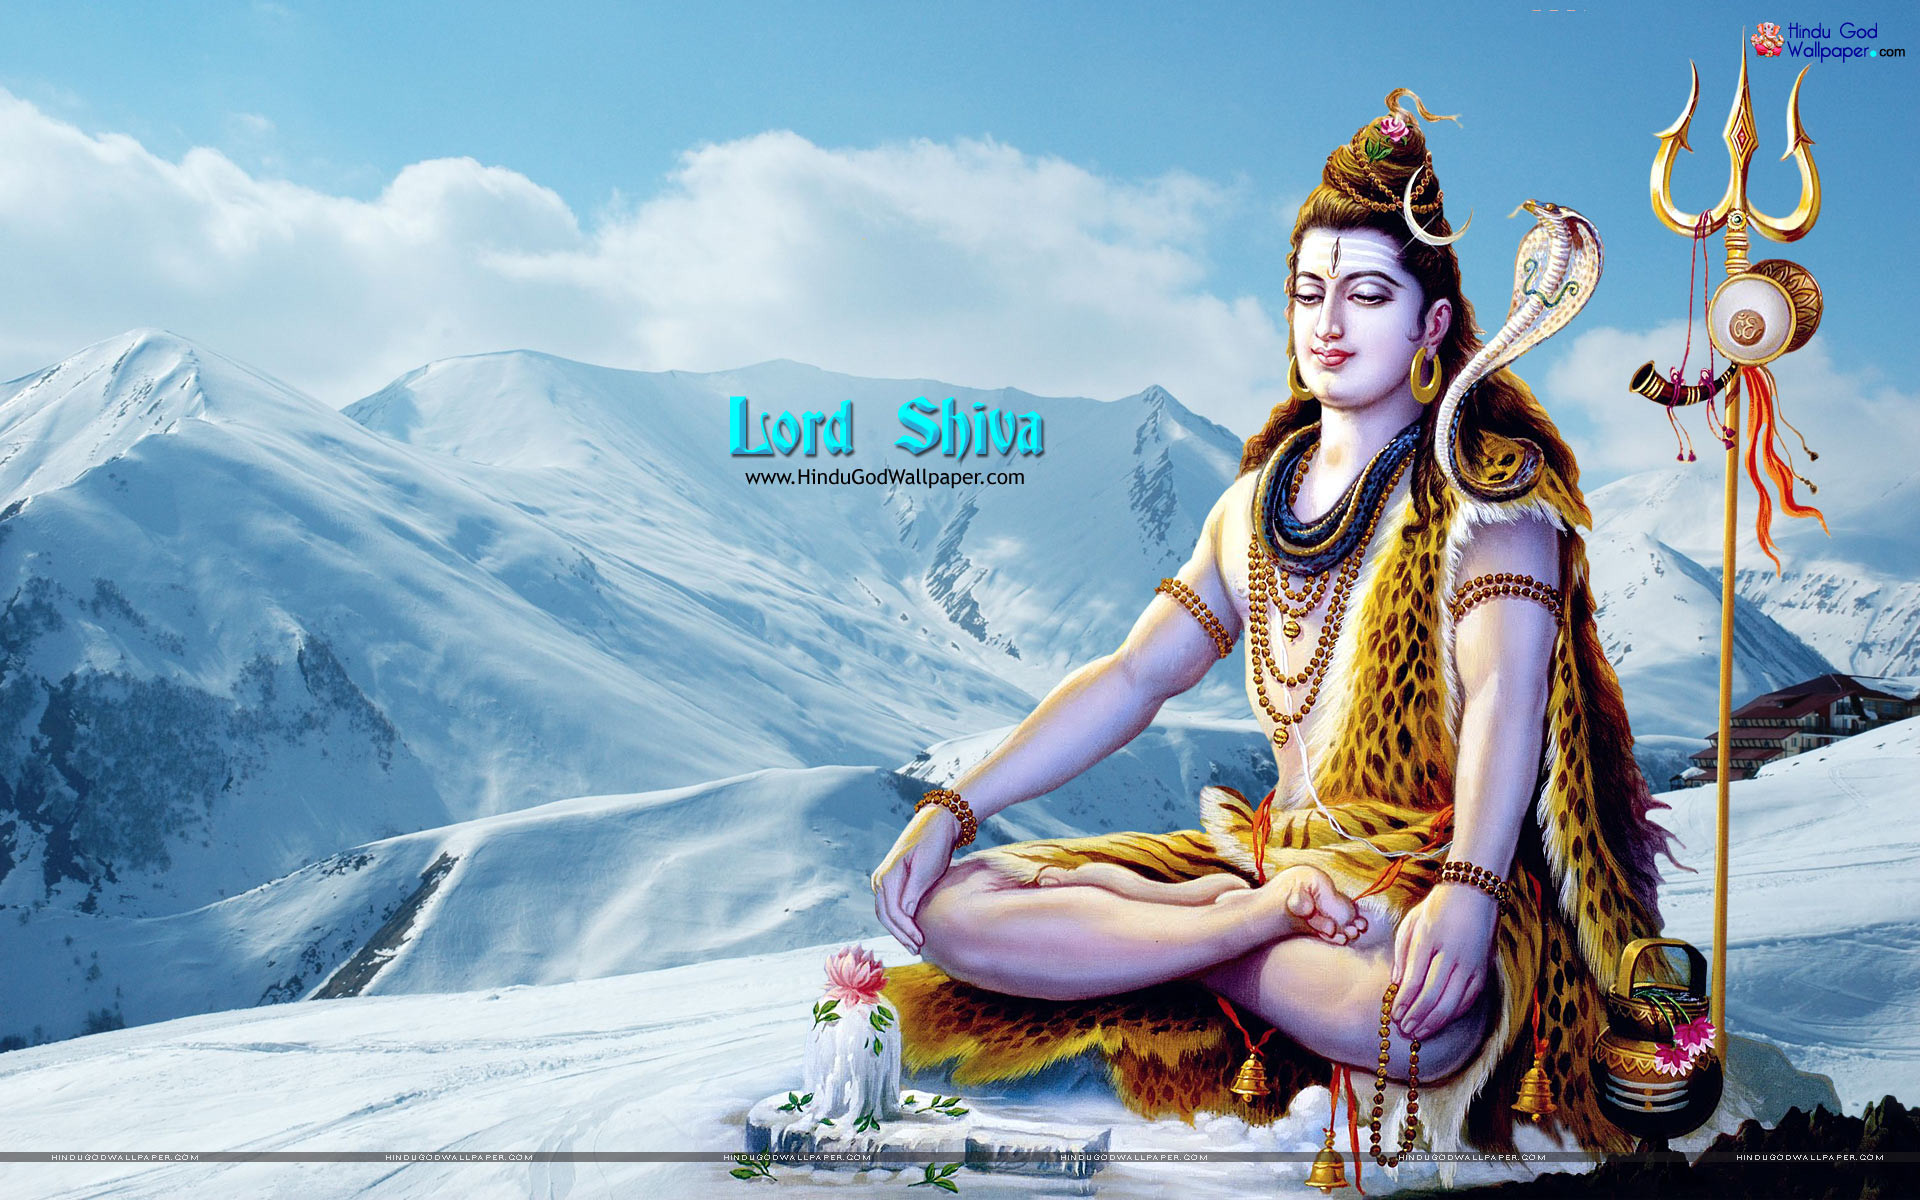 1920x1200 Search Results for “desktop wallpaper hd lord shiva” – Adorable Wallpapers